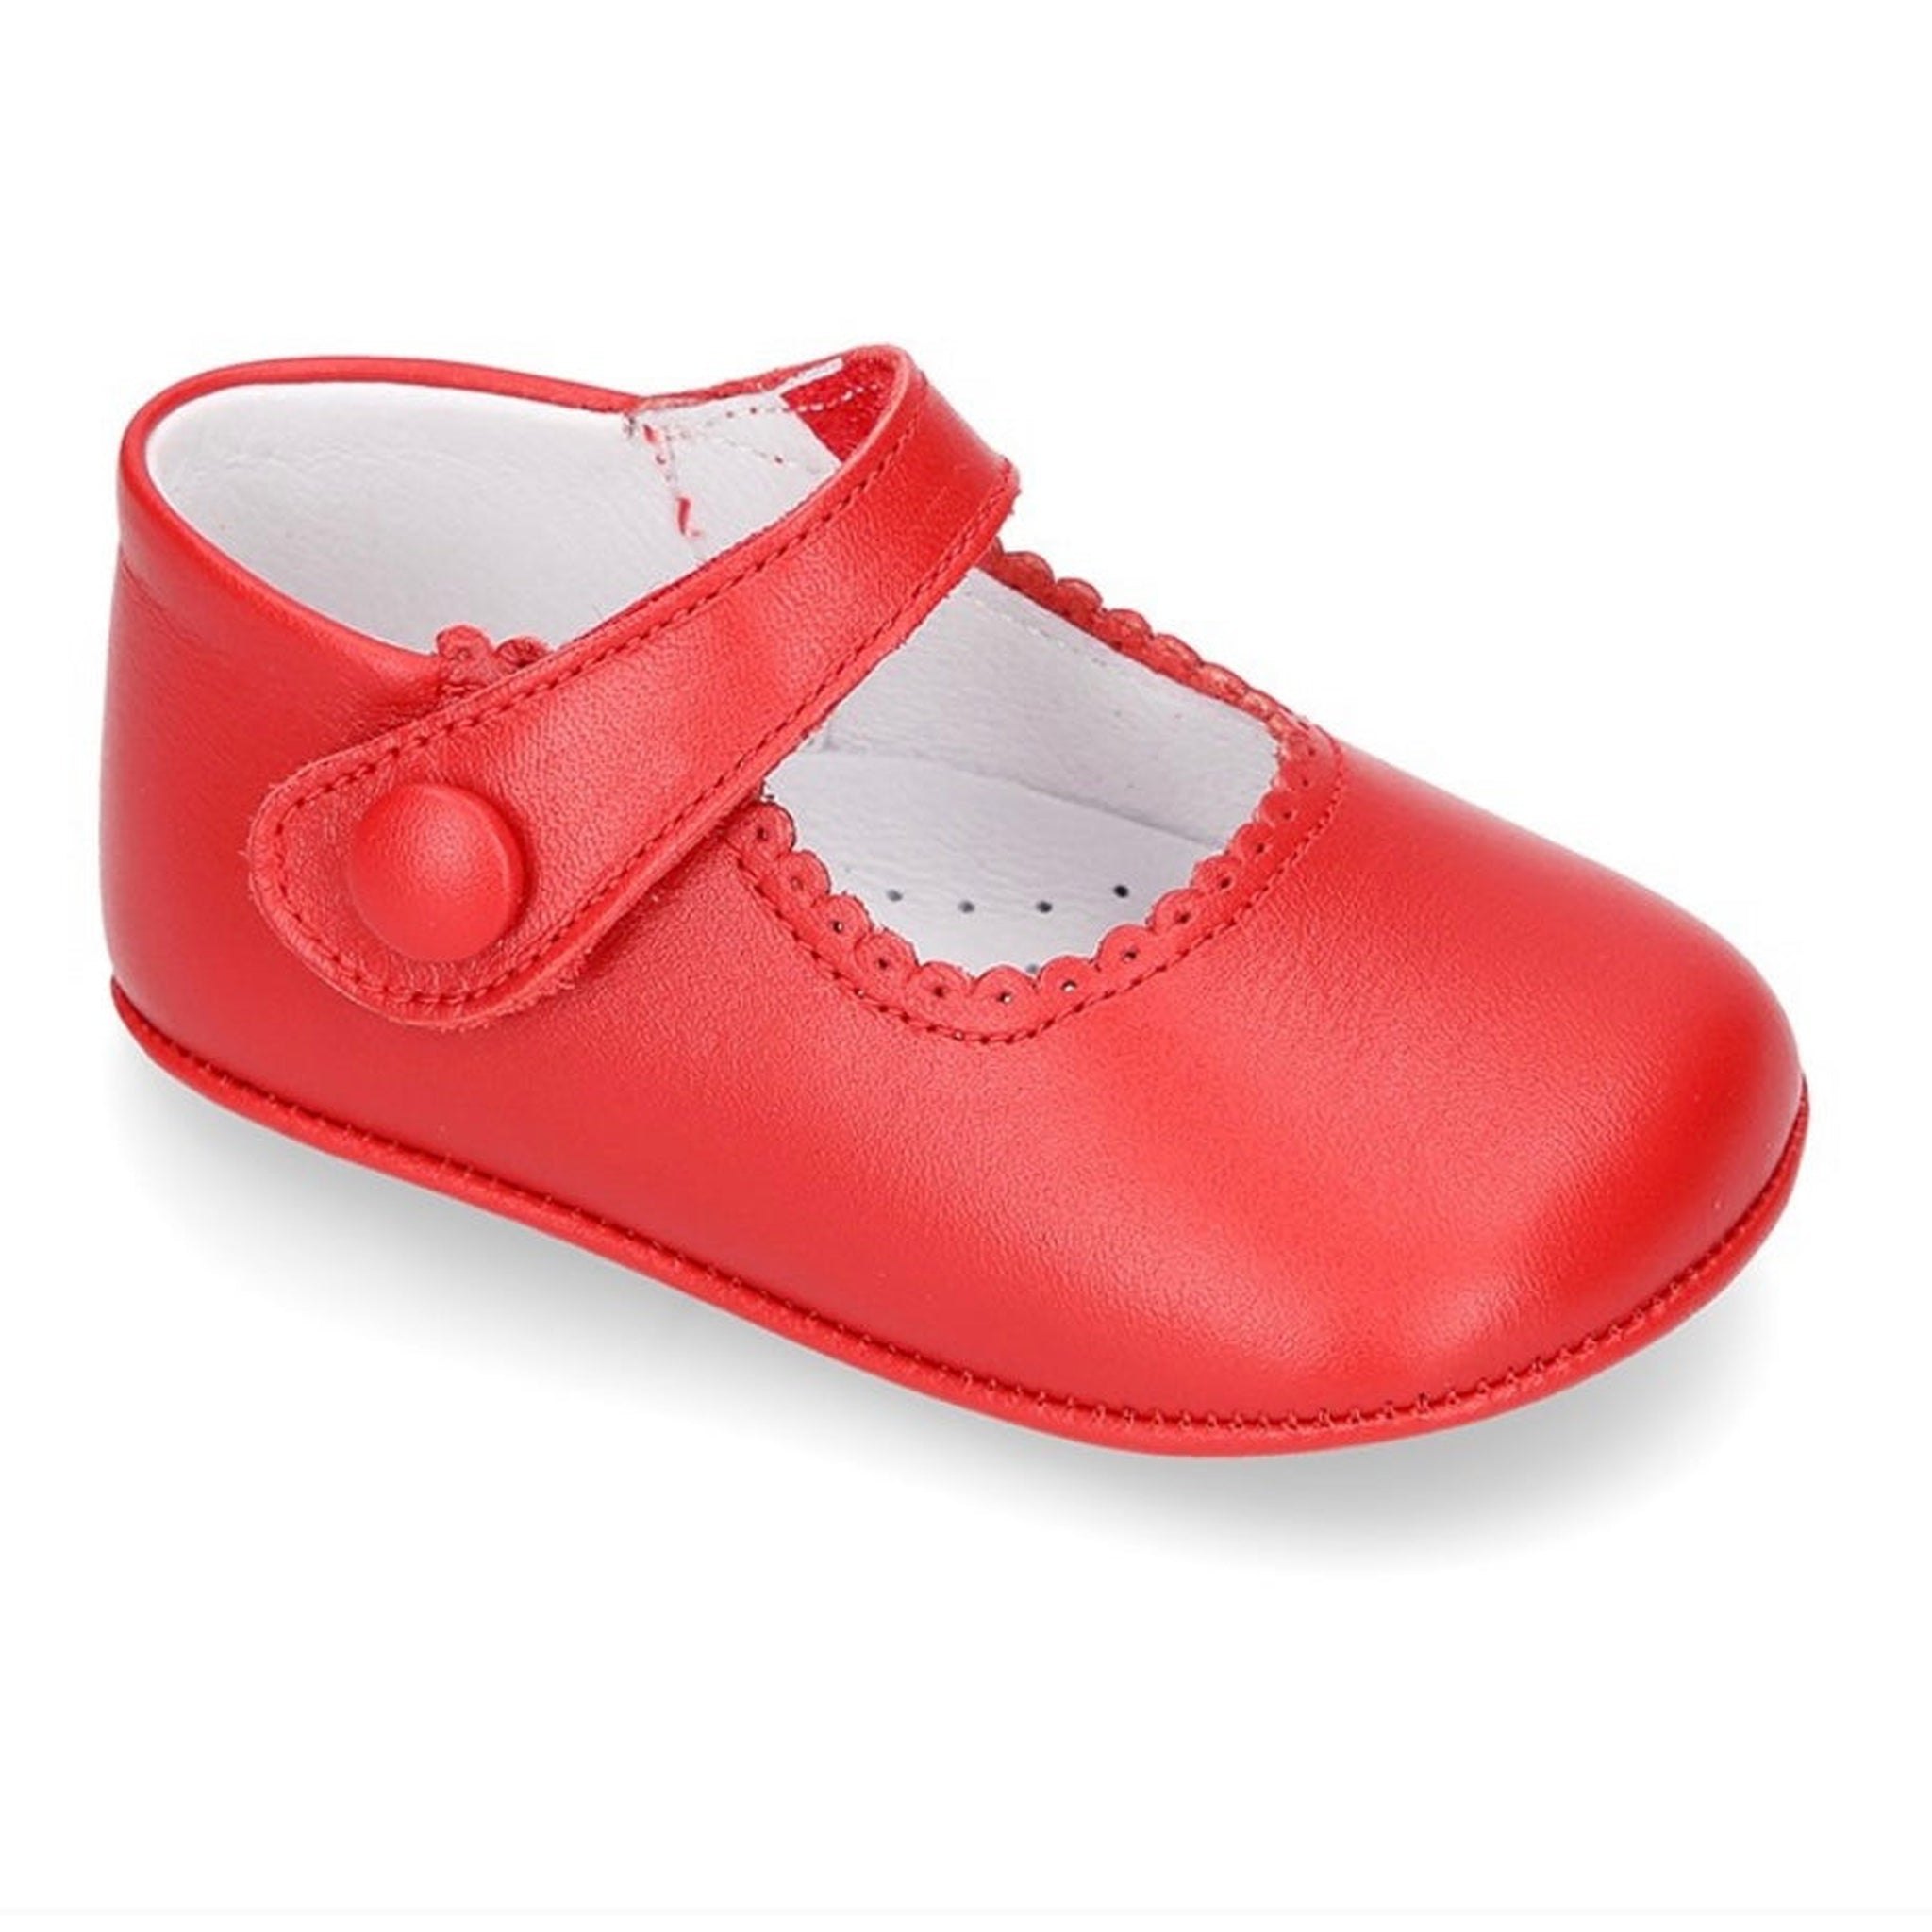 Mary Jane Leather Crib Shoes - Red